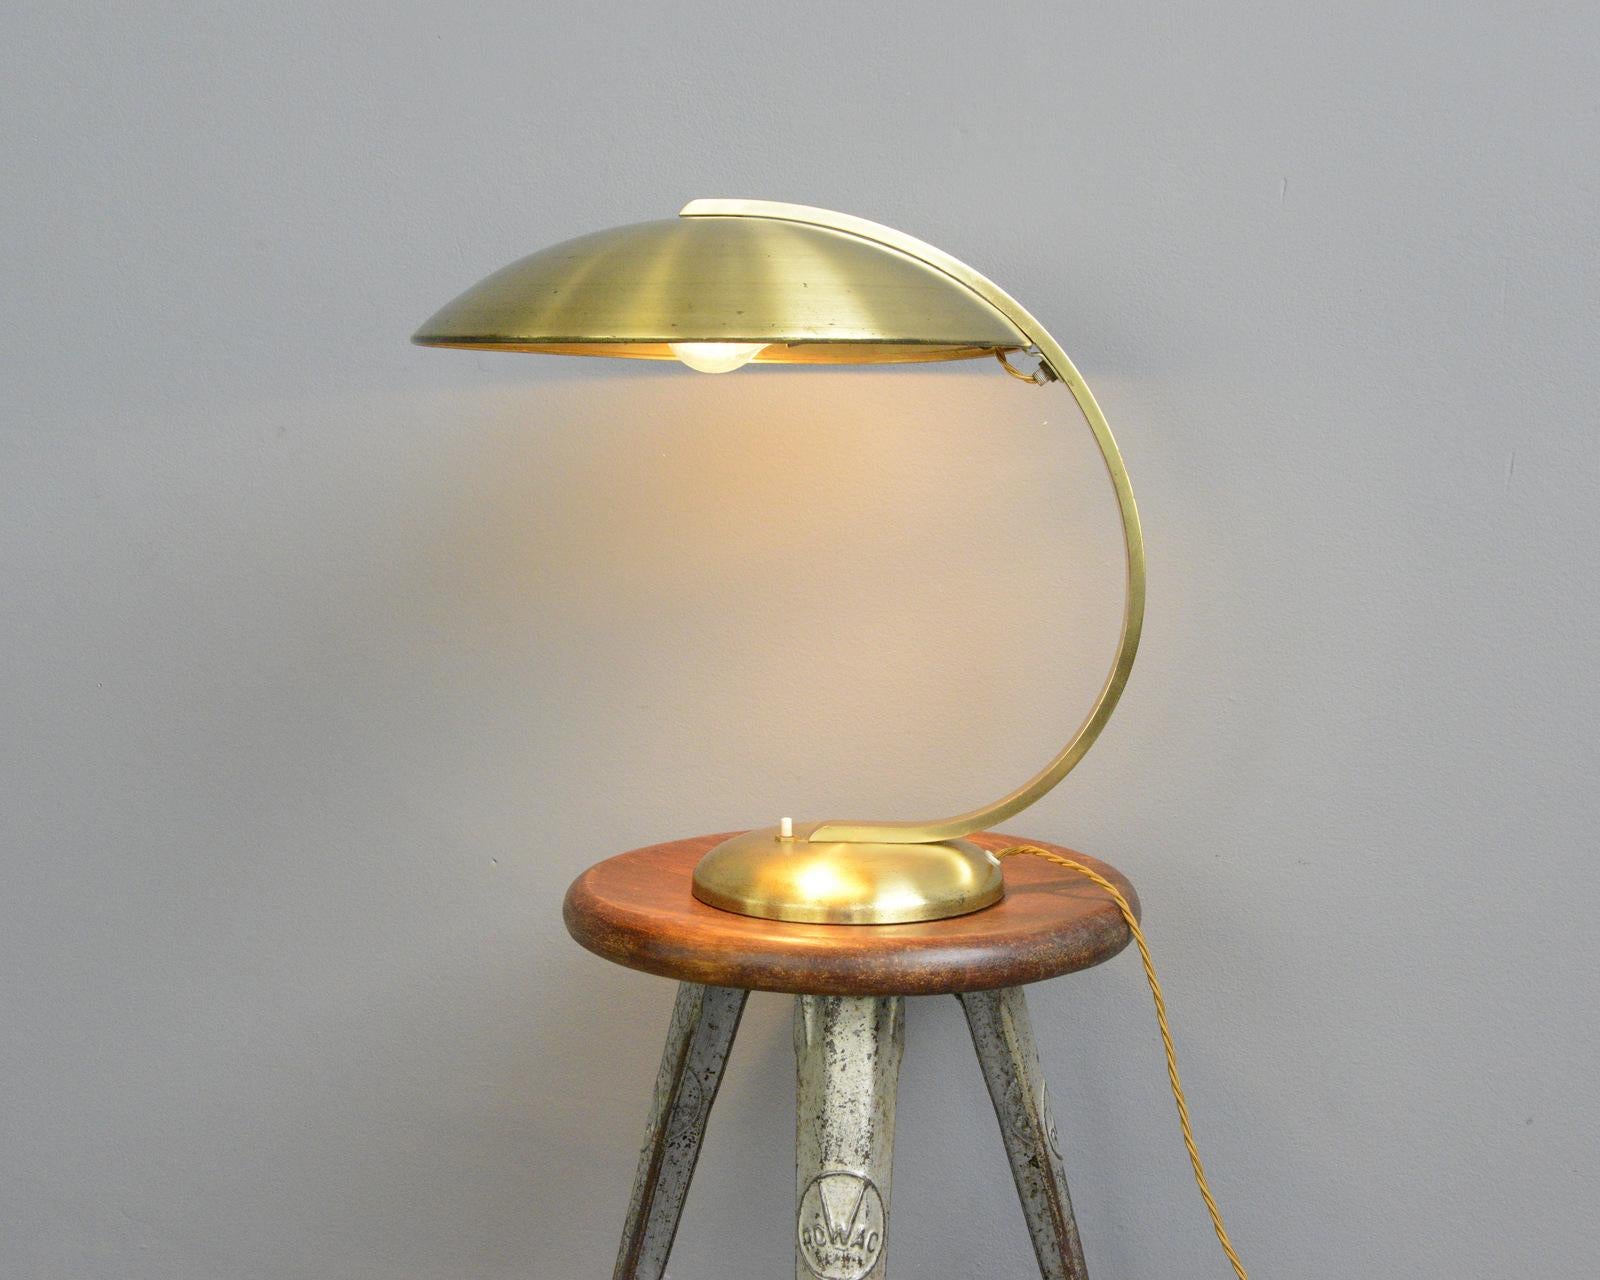 Bauhaus brass table lamp by Hillebrand, circa 1930s

- Fully brass
- Takes E27 fitting bulbs
- On/Off switch on the base
- Made by Hillebrand 
- German ~ 1930s
- Measures: 39cm tall x 40cm wide x 44cm deep

Hillebrand

Hillebrand Leuchten